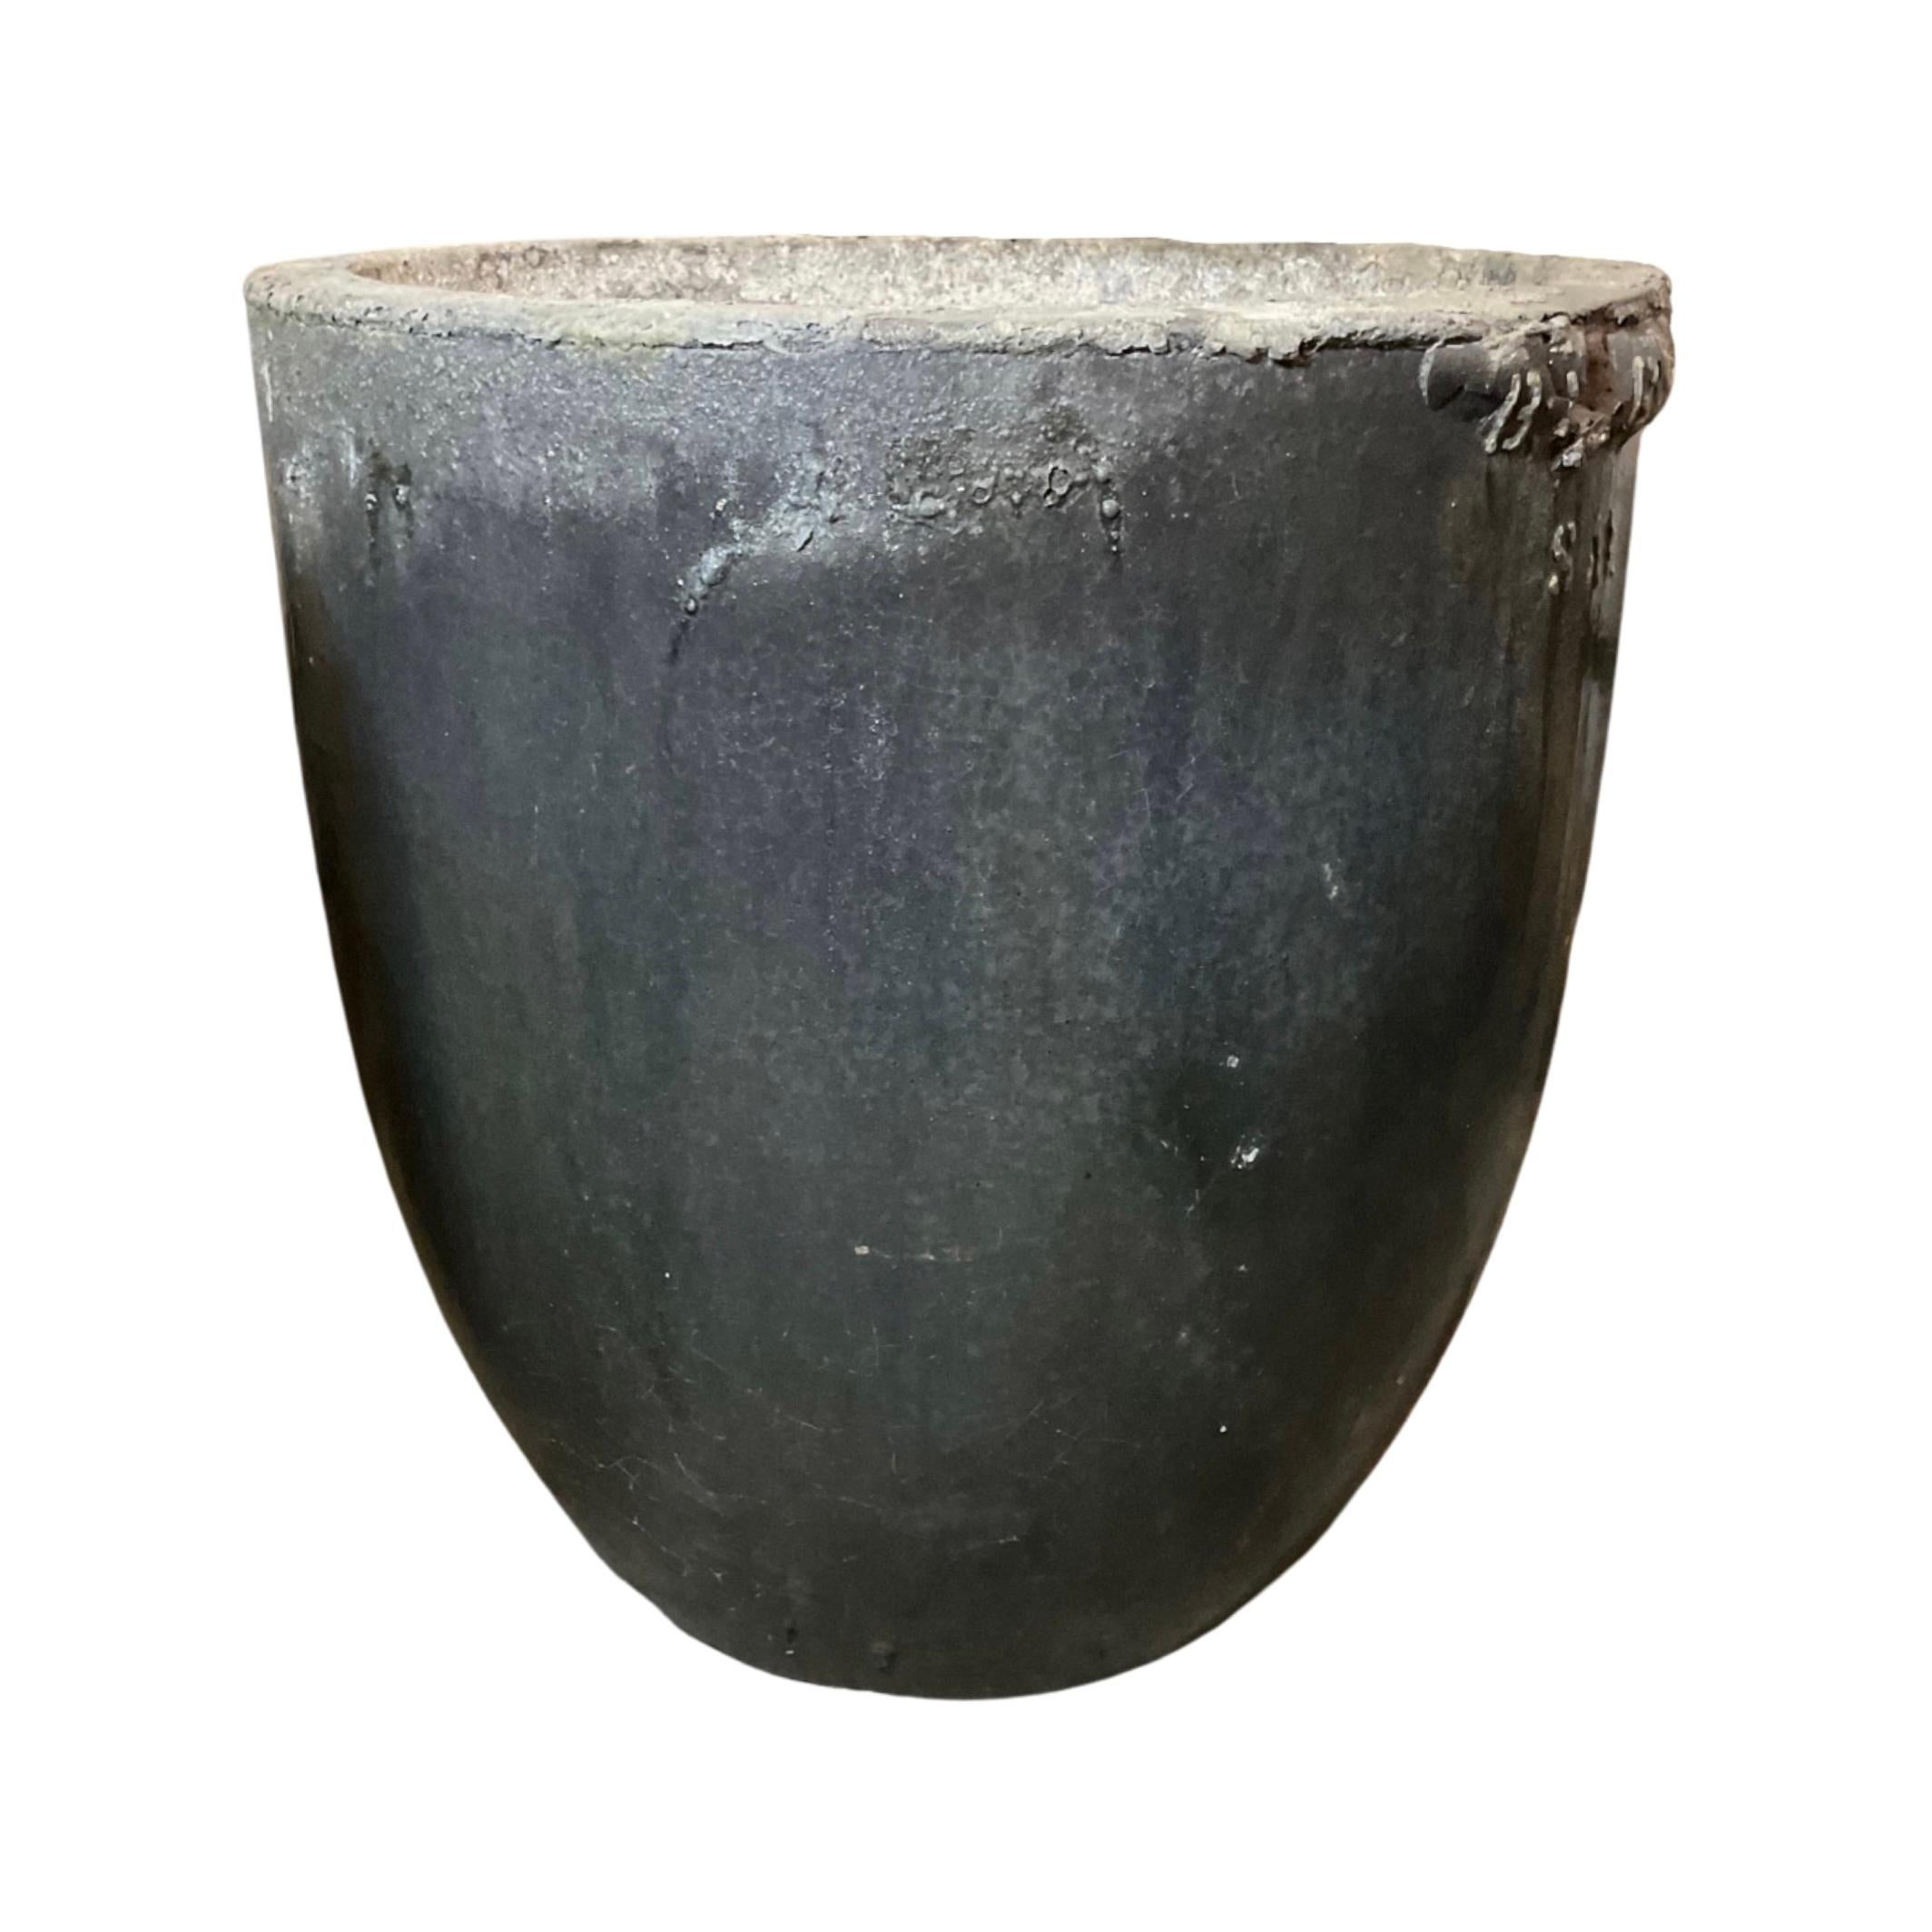 This unique French Pumice Stone Planter is an antique from the 18th century, made from genuine pumice. Its rustic charm is perfect for bringing an aged feel to any garden or home. Get it now for a timeless addition to your living space.